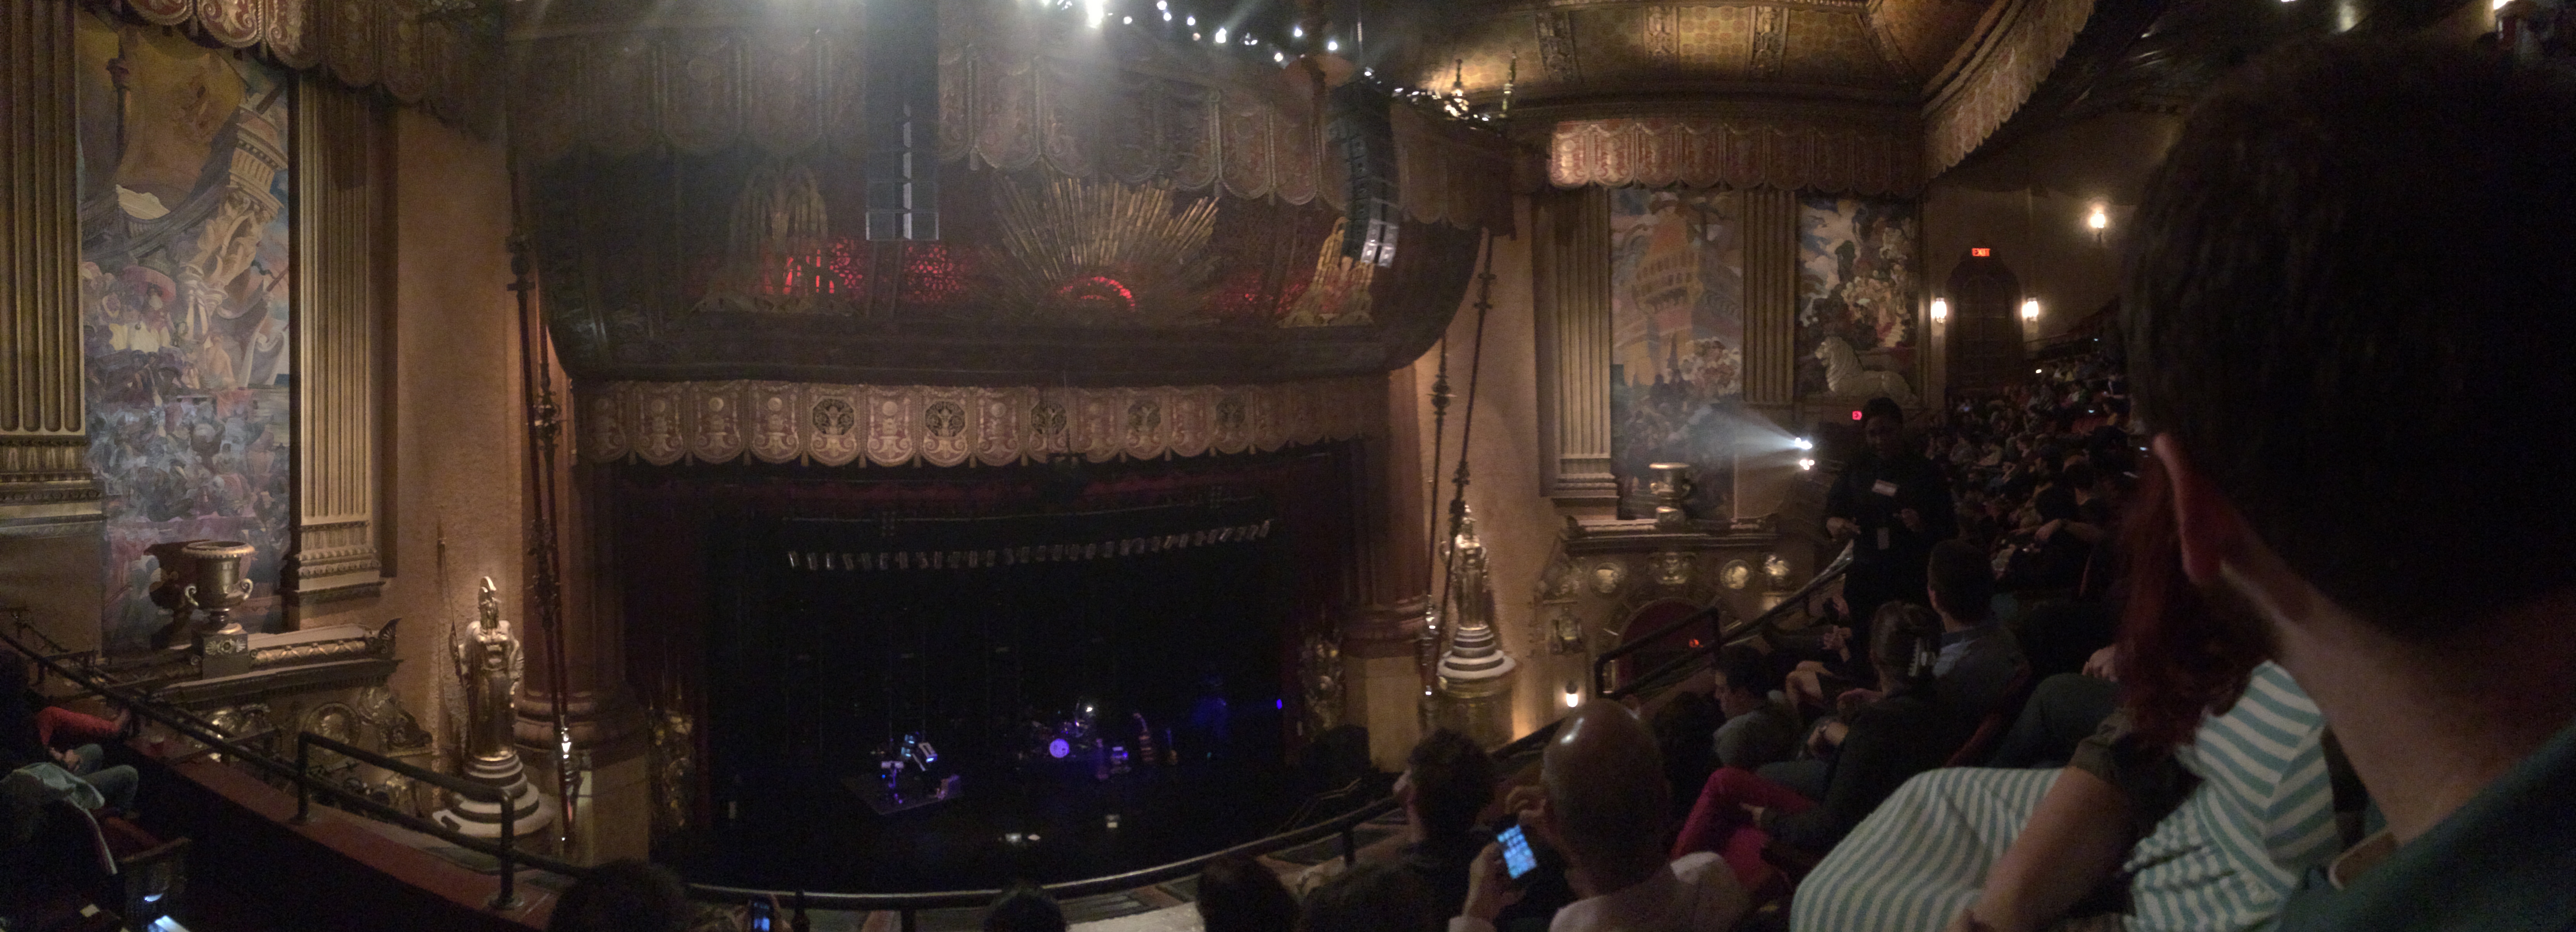 Seeing the Barenaked Ladies at the Beacon Theatre on the Upper West Side in NYC through HowAboutWe for Couples!